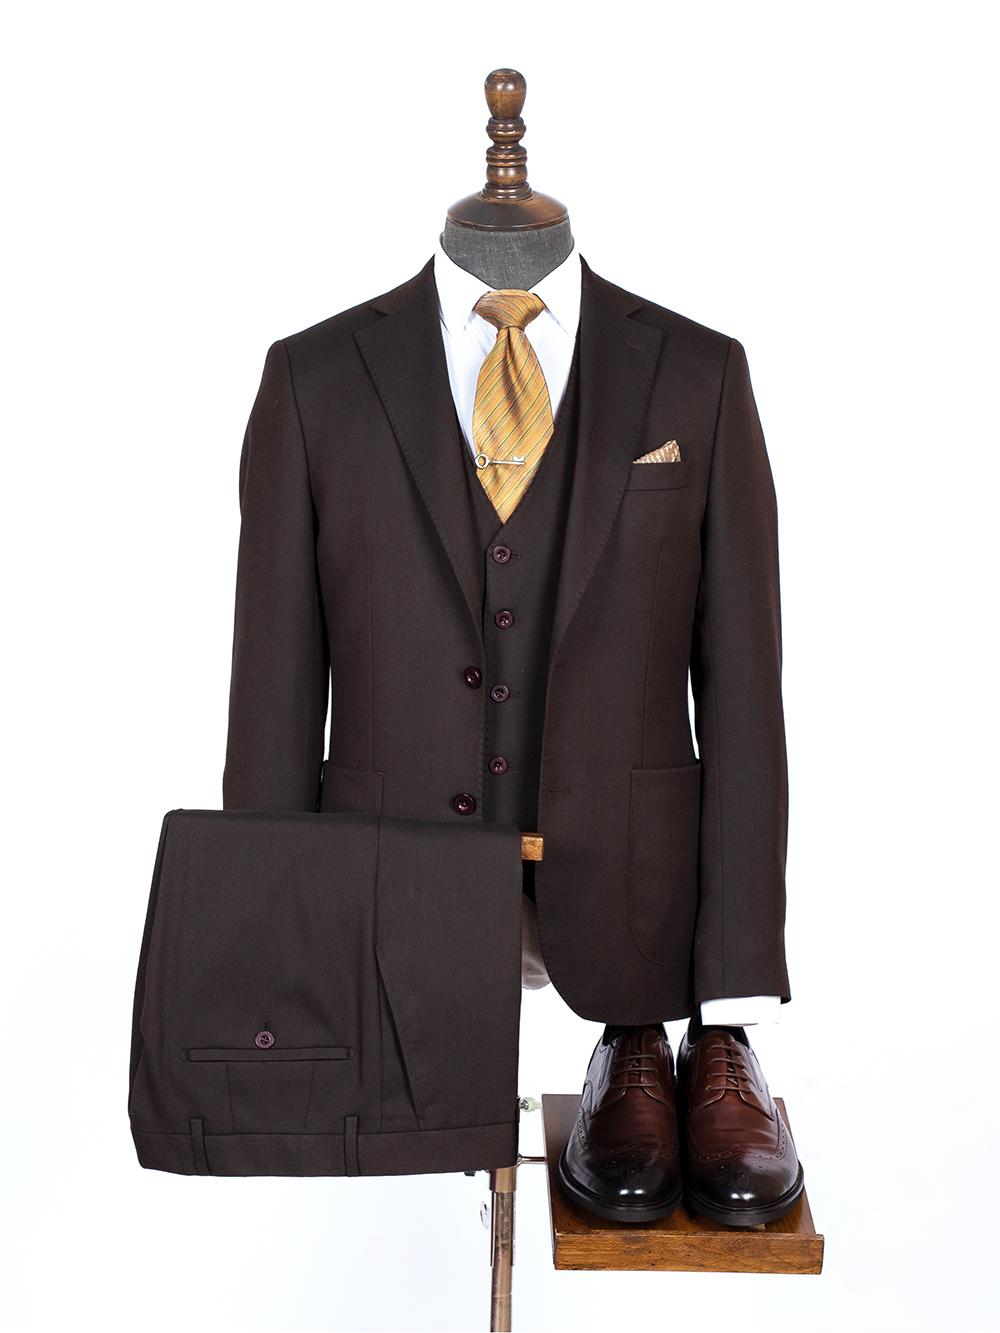 Three Pieces Of brown coffee Stripes Bespoke Men Suit Tailored